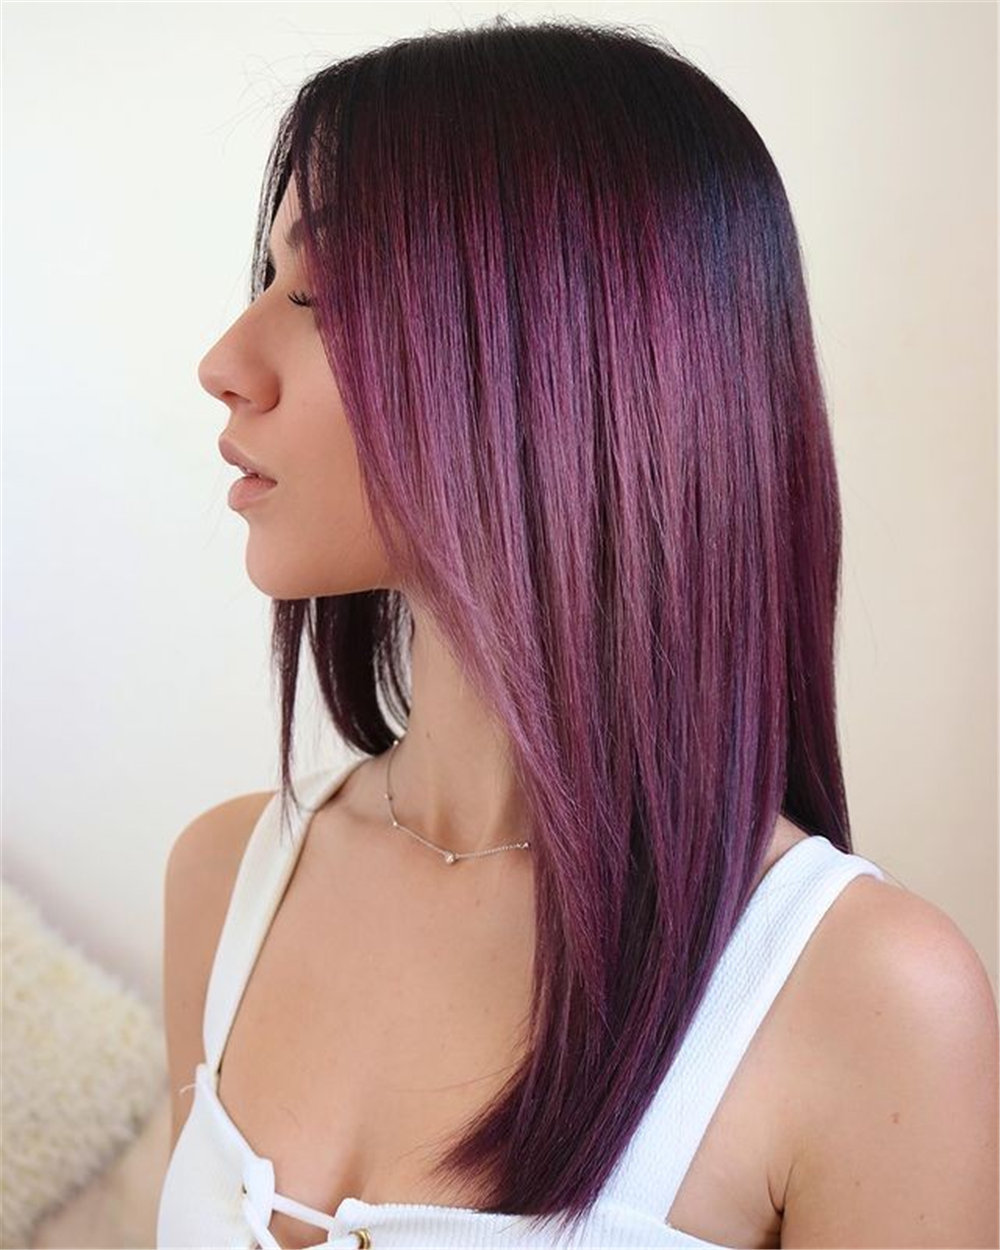 Burgundy Hair Color Trends 2022 for the Fall, burgundy hair color ideas, maroon haircuts for women